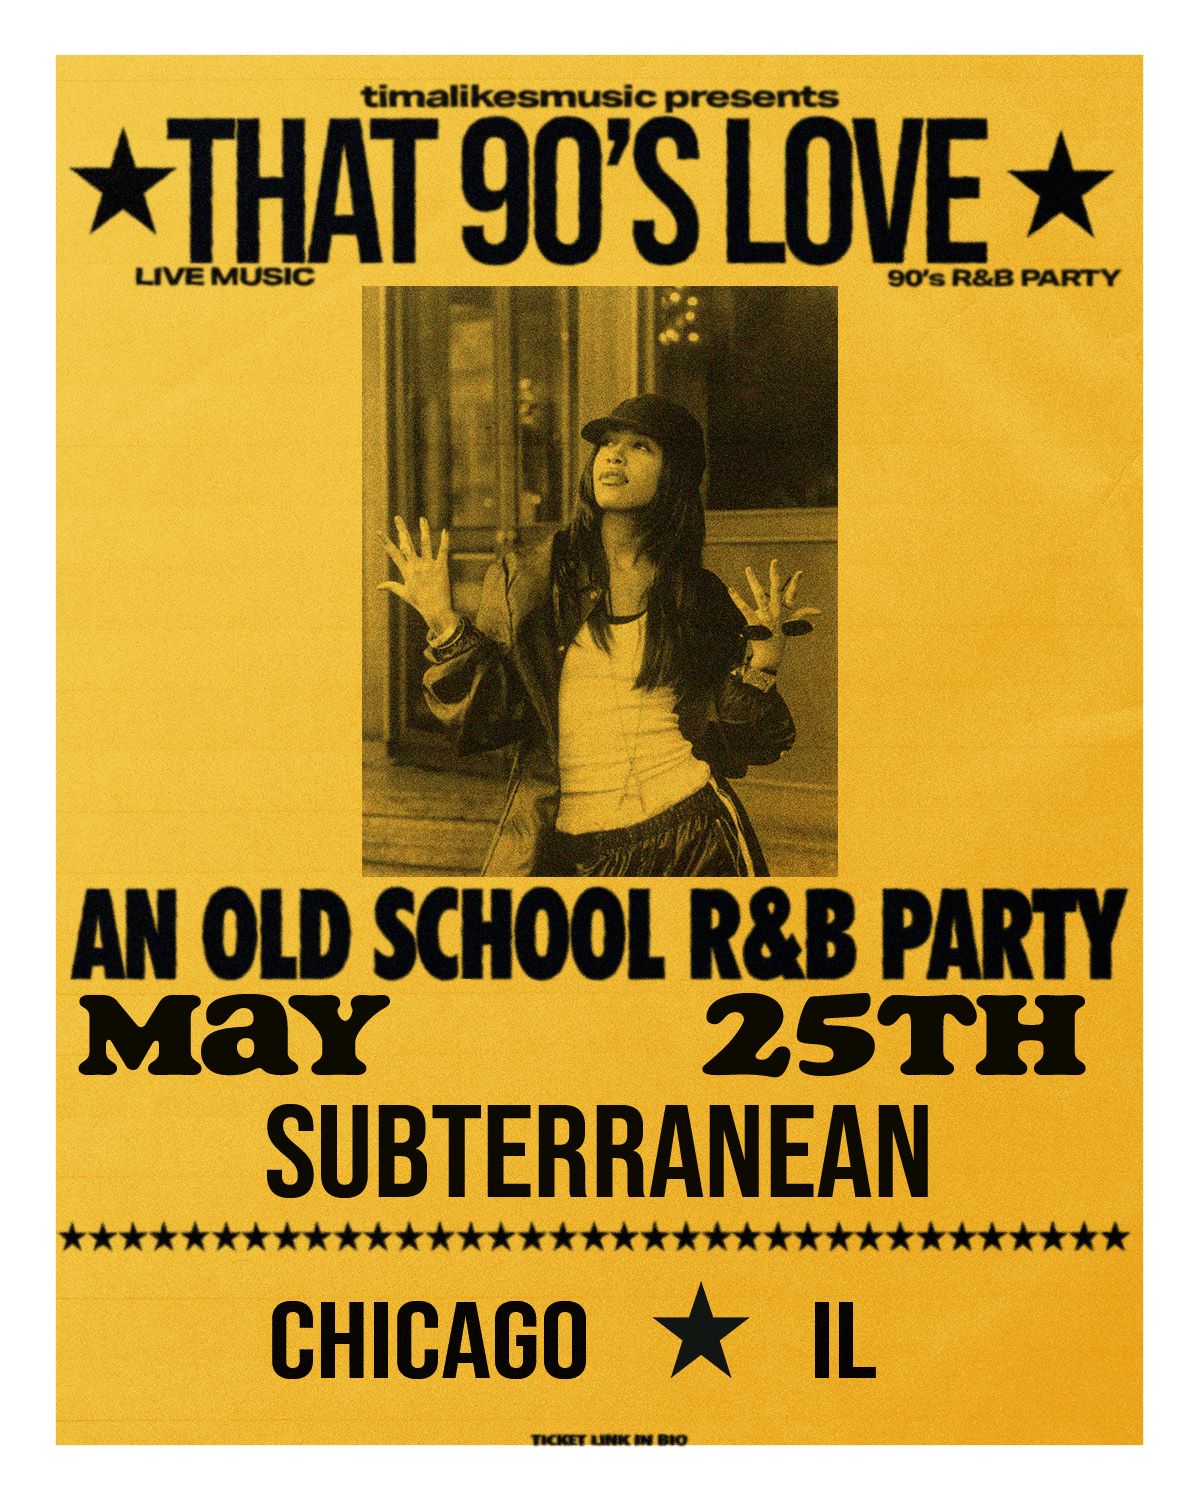 TimaLikesMusic presents That 90's Love: an Old School R&B Party at Subterranean